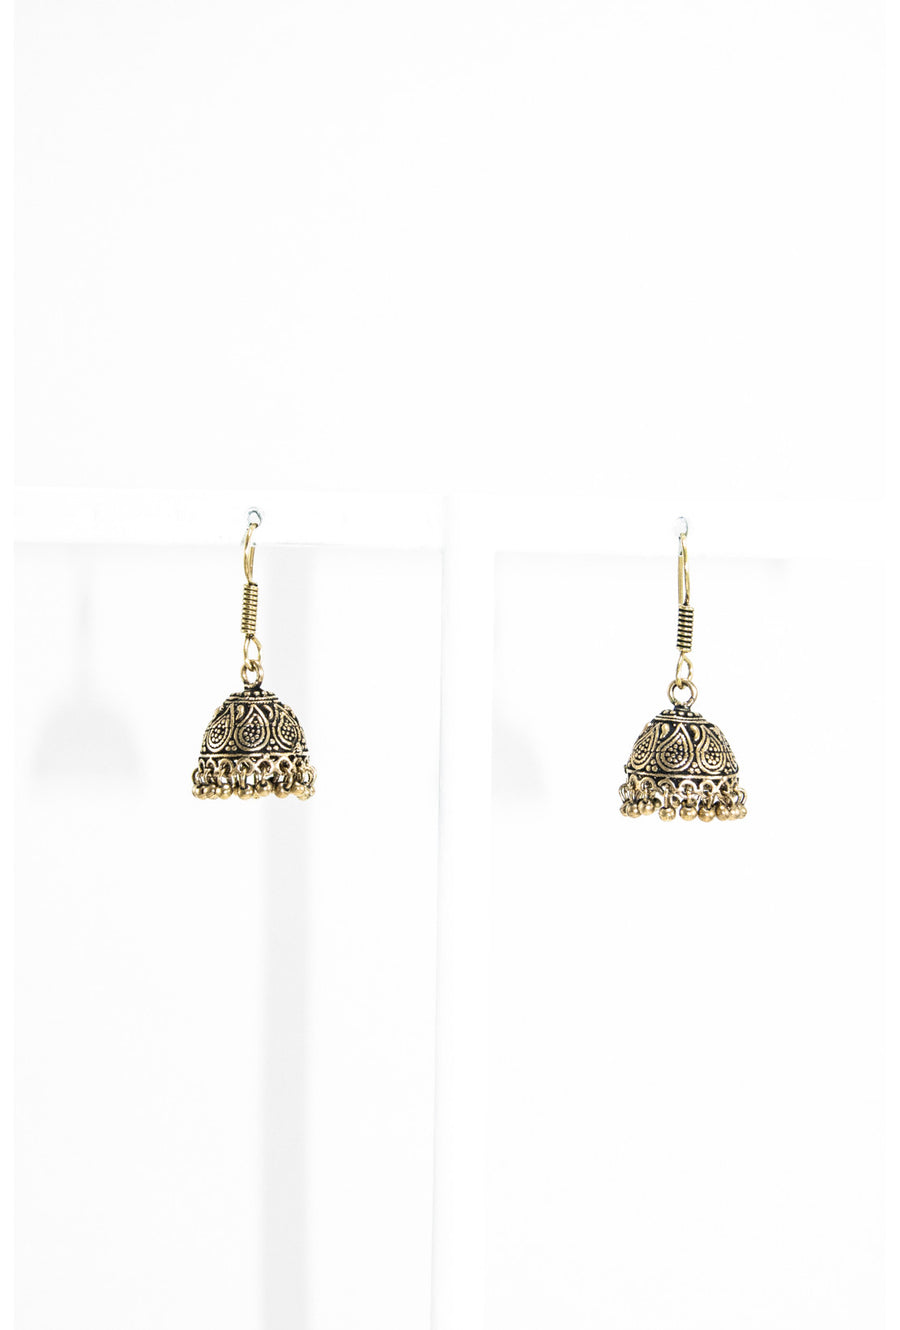 Gold domed earrings with gold beads - Desi Royale